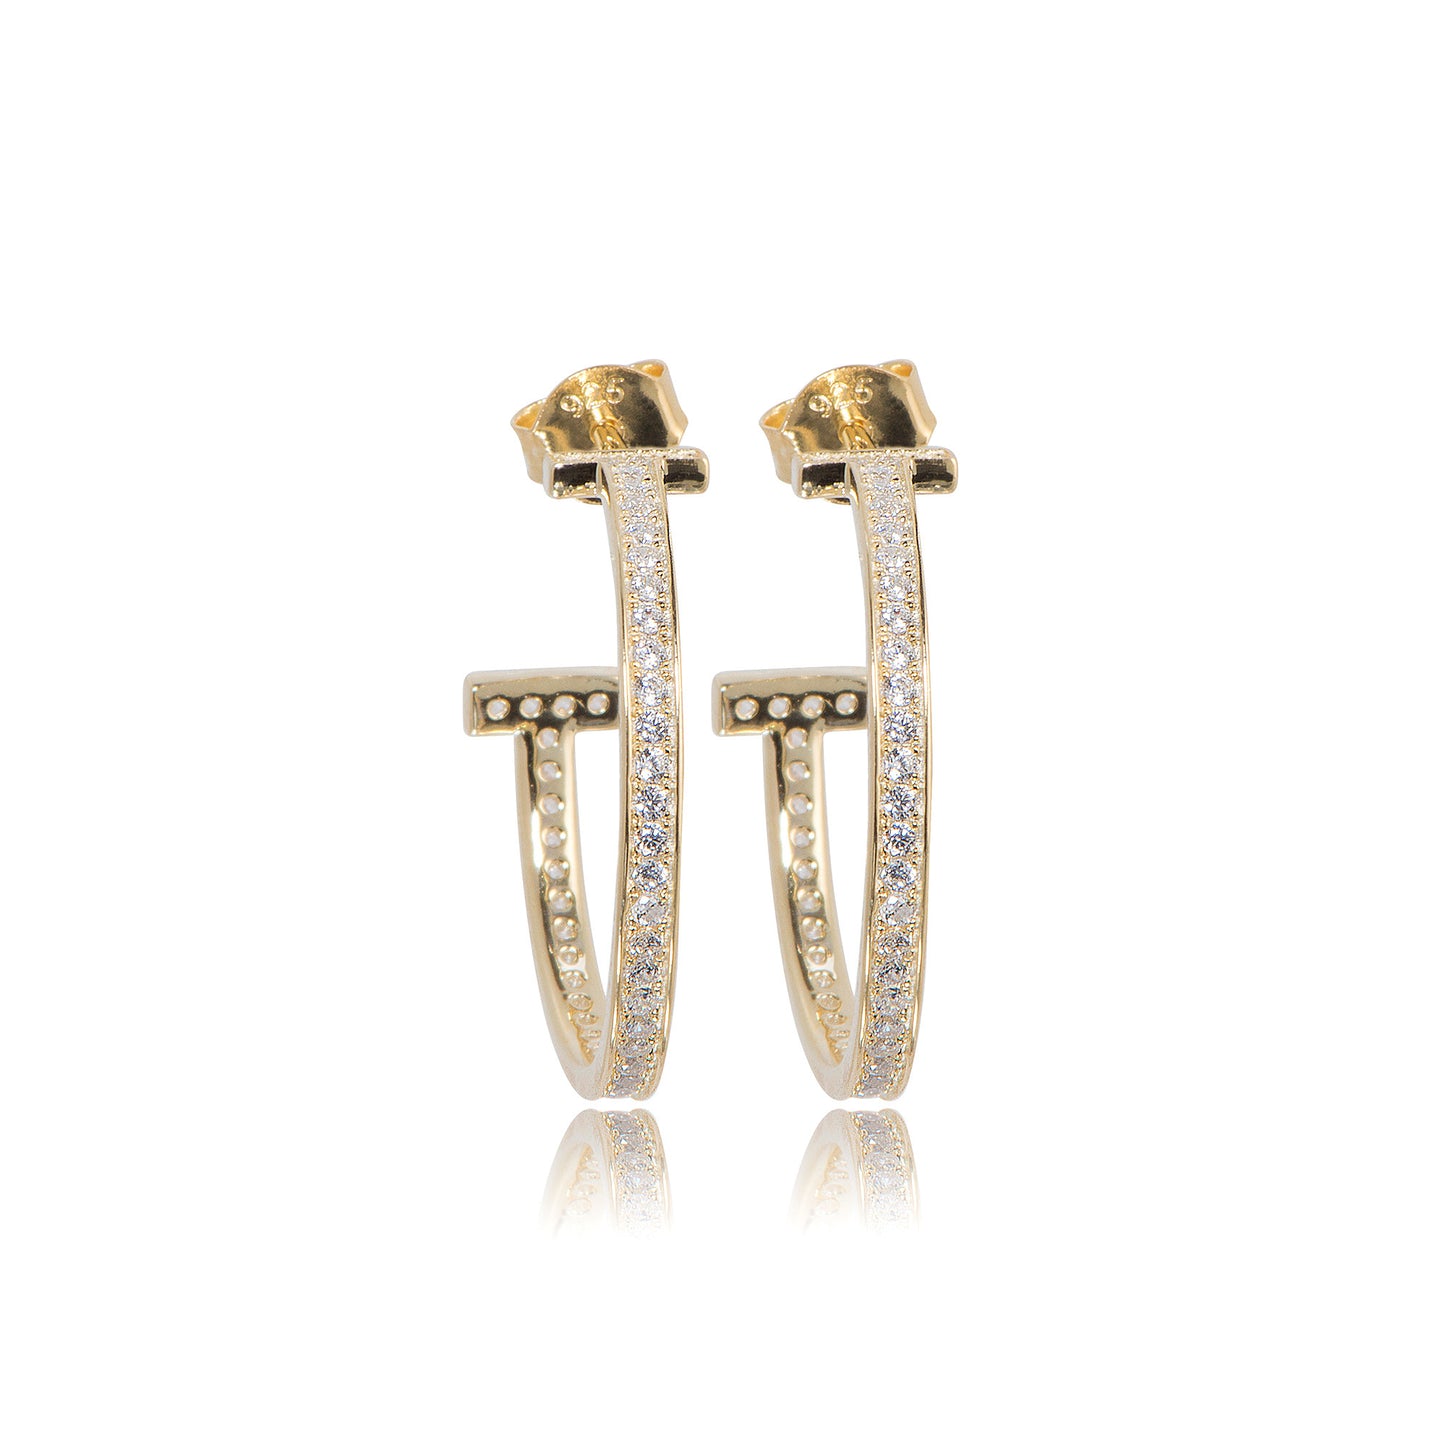 EYJ-80/G - T earrings Set with Cubic Zirconia